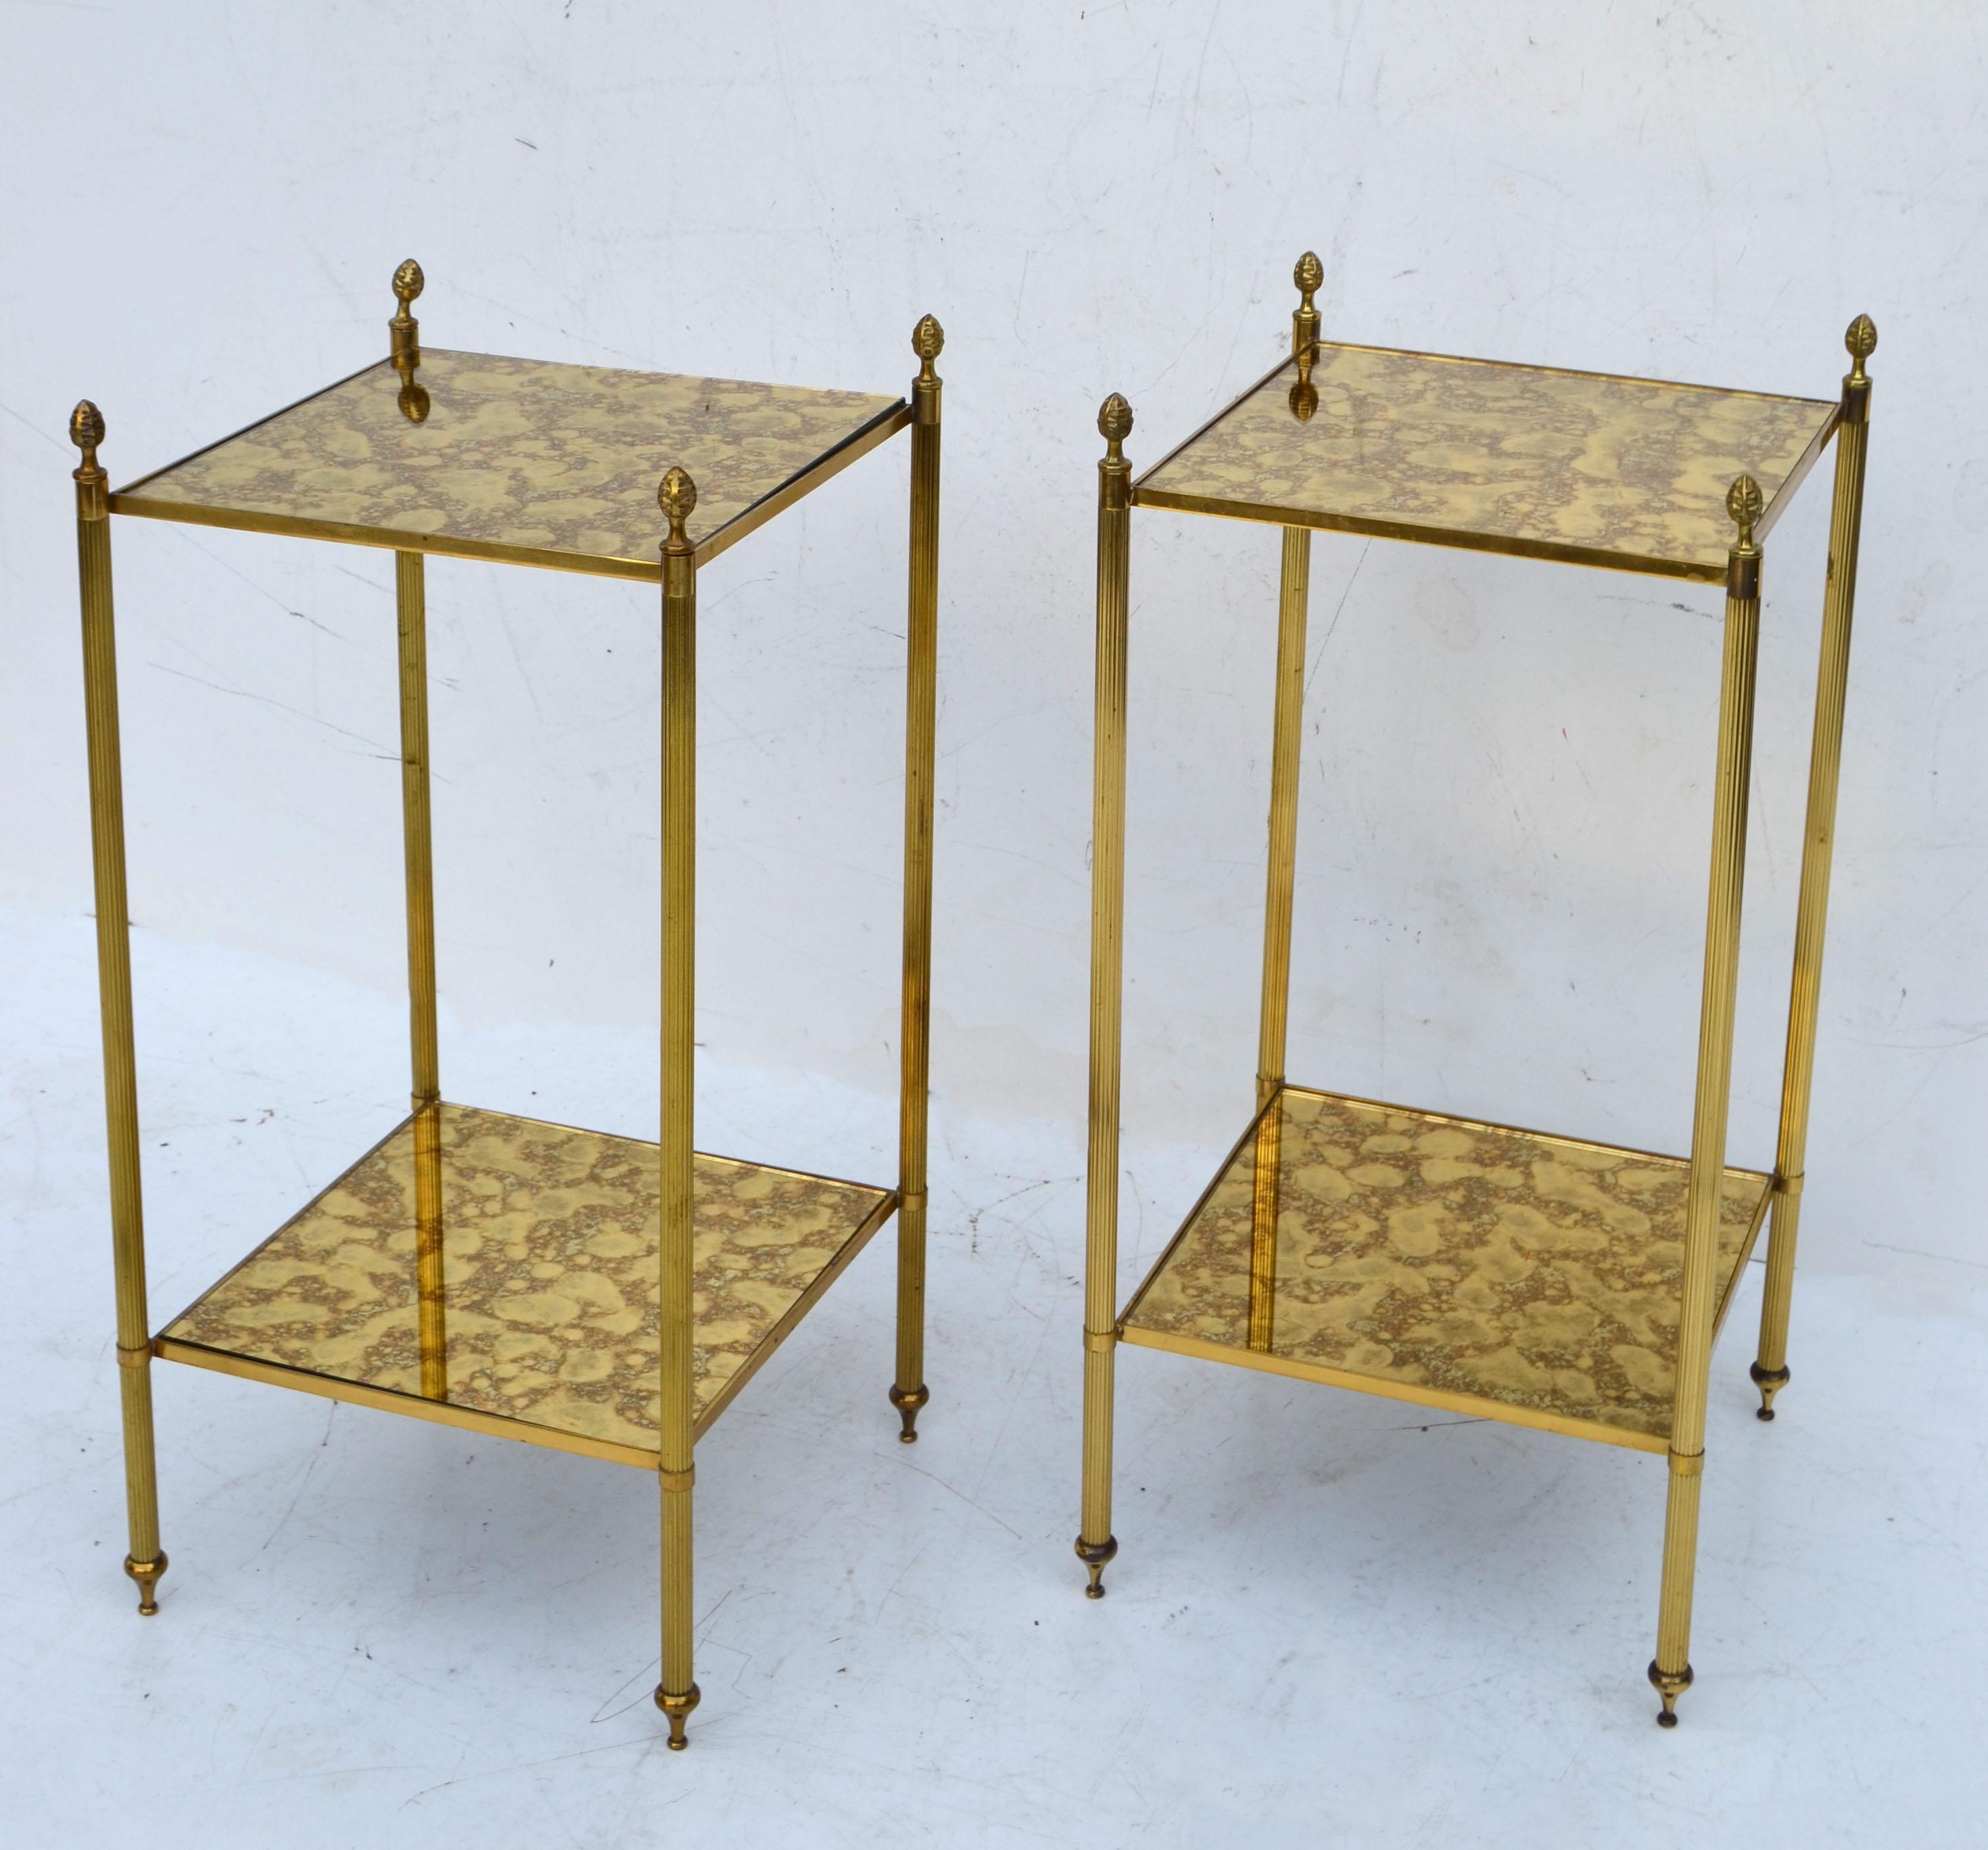 Superb pair of side table by Maison Jansen neoclassical made in France circa 1960.
Brass with antique mirror cloudy Glass Tops.
Great also as sofa or end table.
Mirror top measure: 11.5 x 11.5 x 0.25 inches.